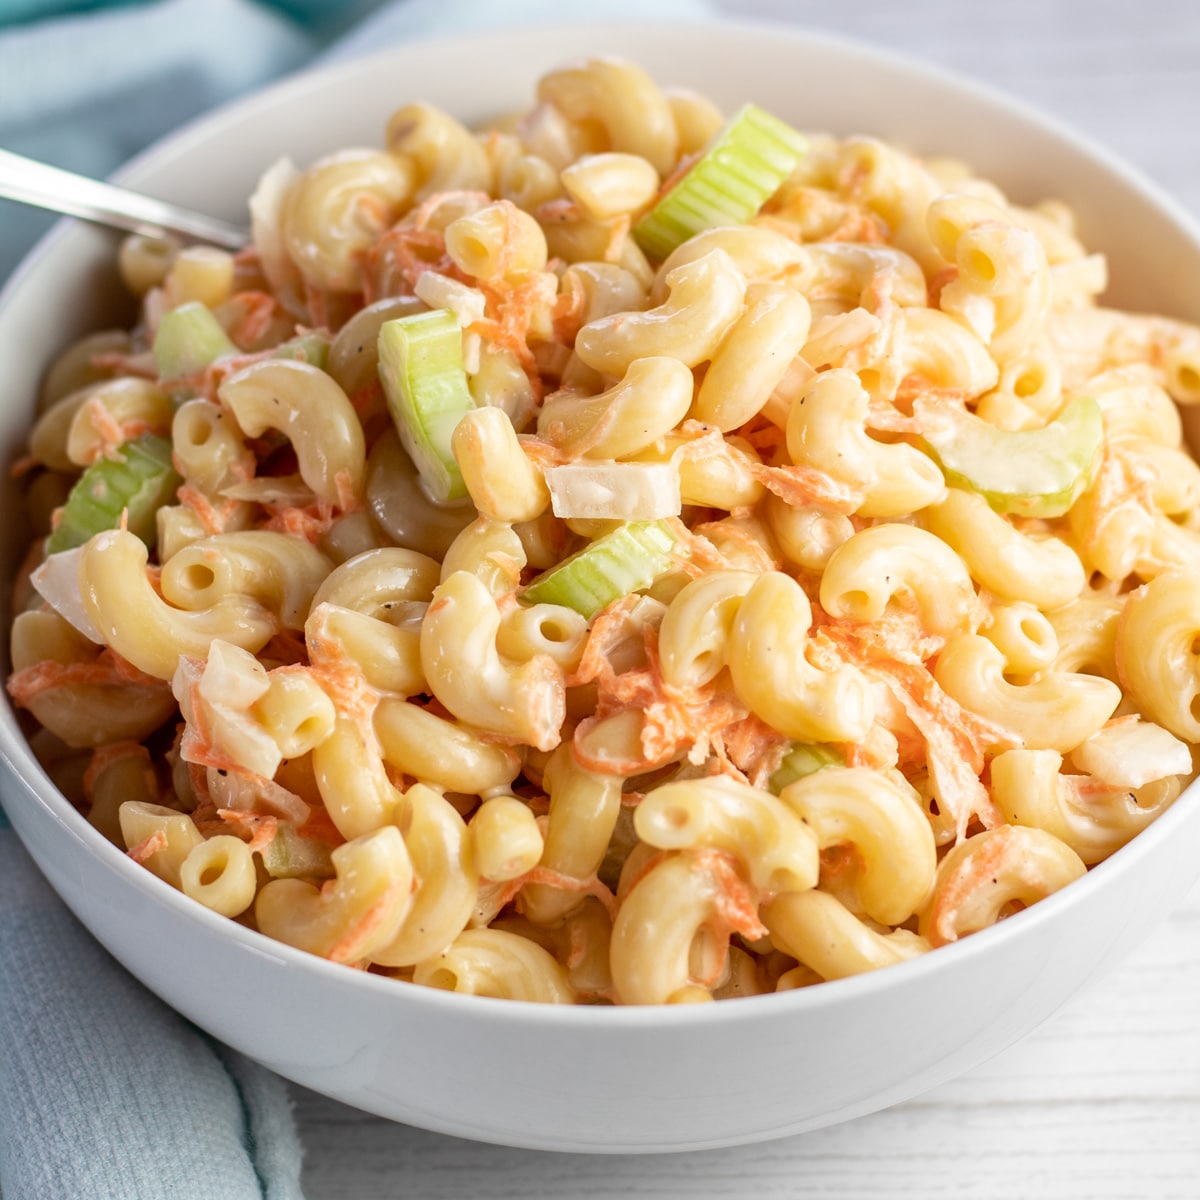 Best Hawaiian macaroni salad served in white bowl on light background.